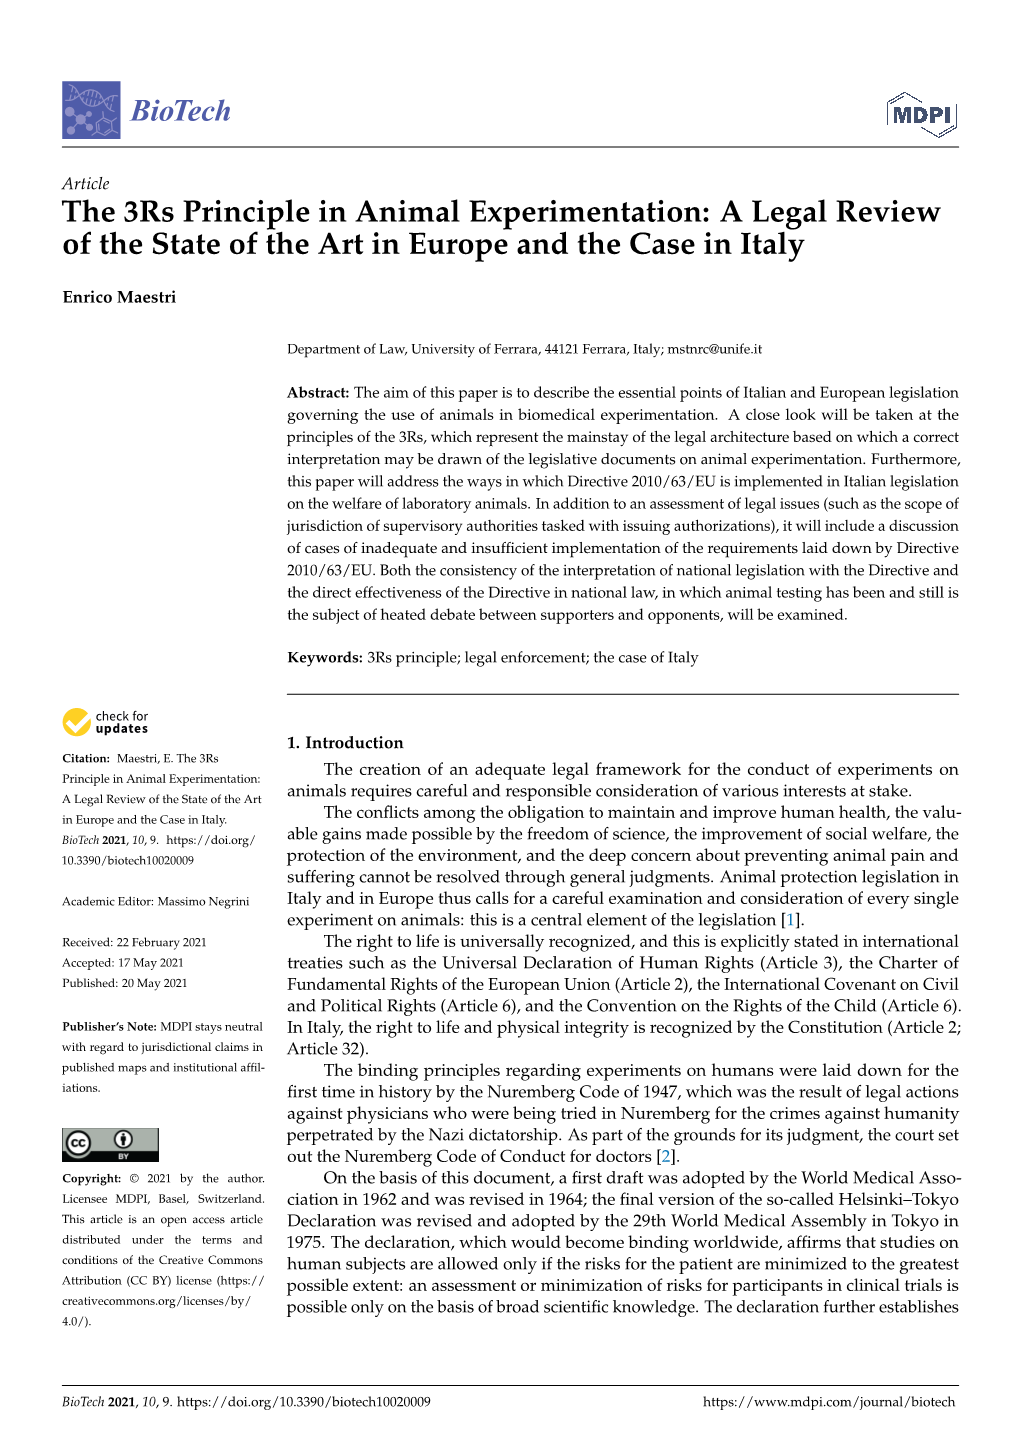 The 3Rs Principle in Animal Experimentation: a Legal Review of the State of the Art in Europe and the Case in Italy